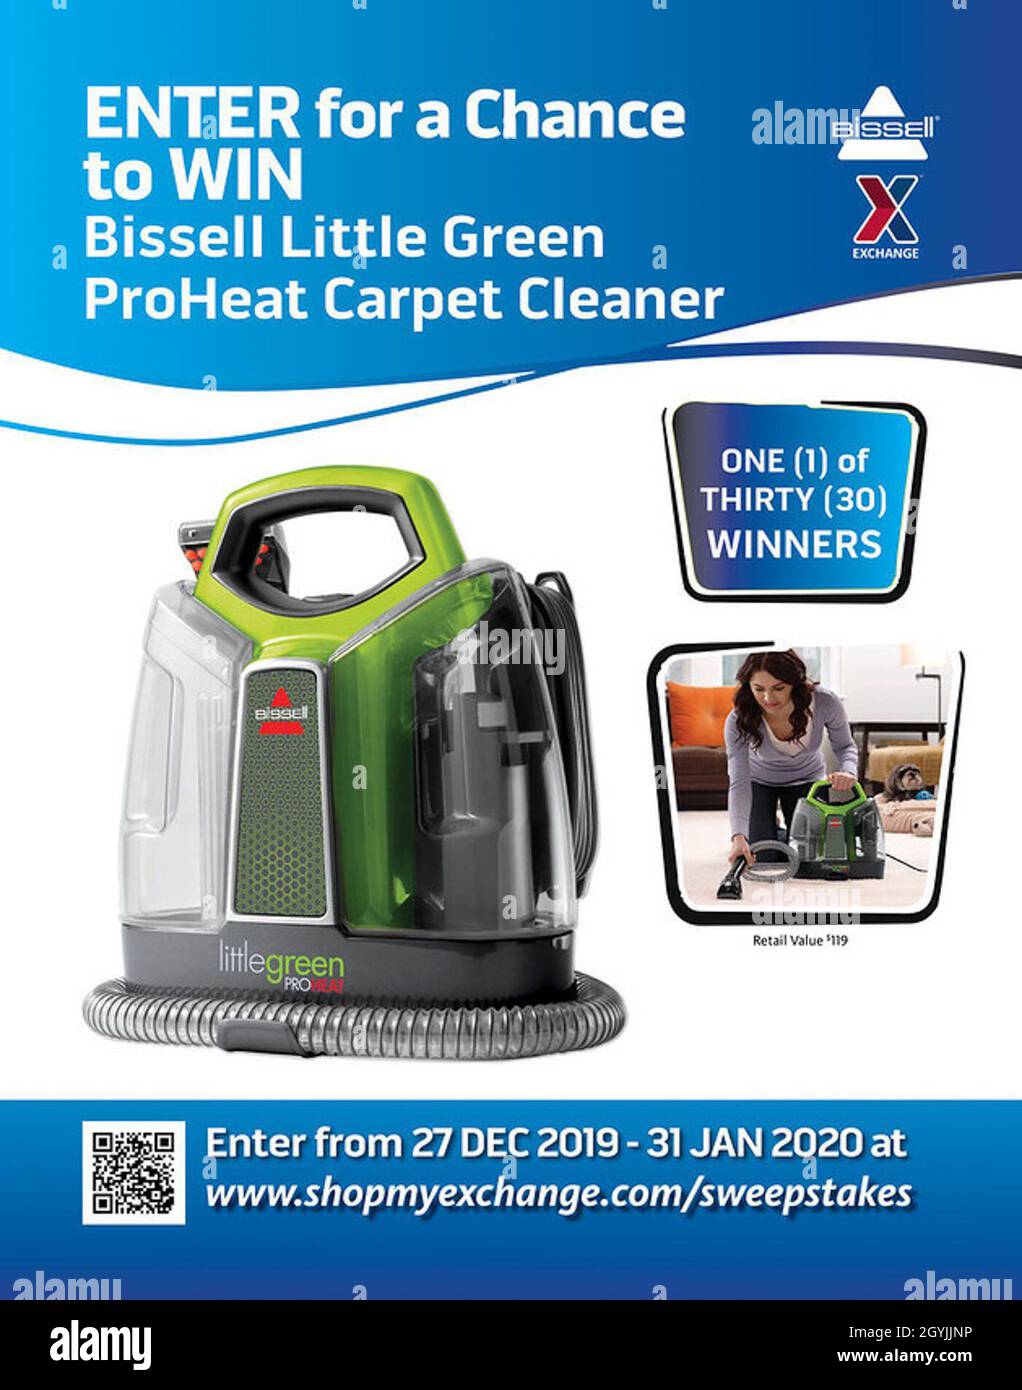 From Dec. 27 to Jan. 31, authorized shoppers age 18 and older—including honorably discharged Veterans—can visit ShopMyExchange.com/sweepstakes to enter to win one of 30 Bissell Little Green ProHeat carpet cleaners, valued at $119 each. Stock Photo